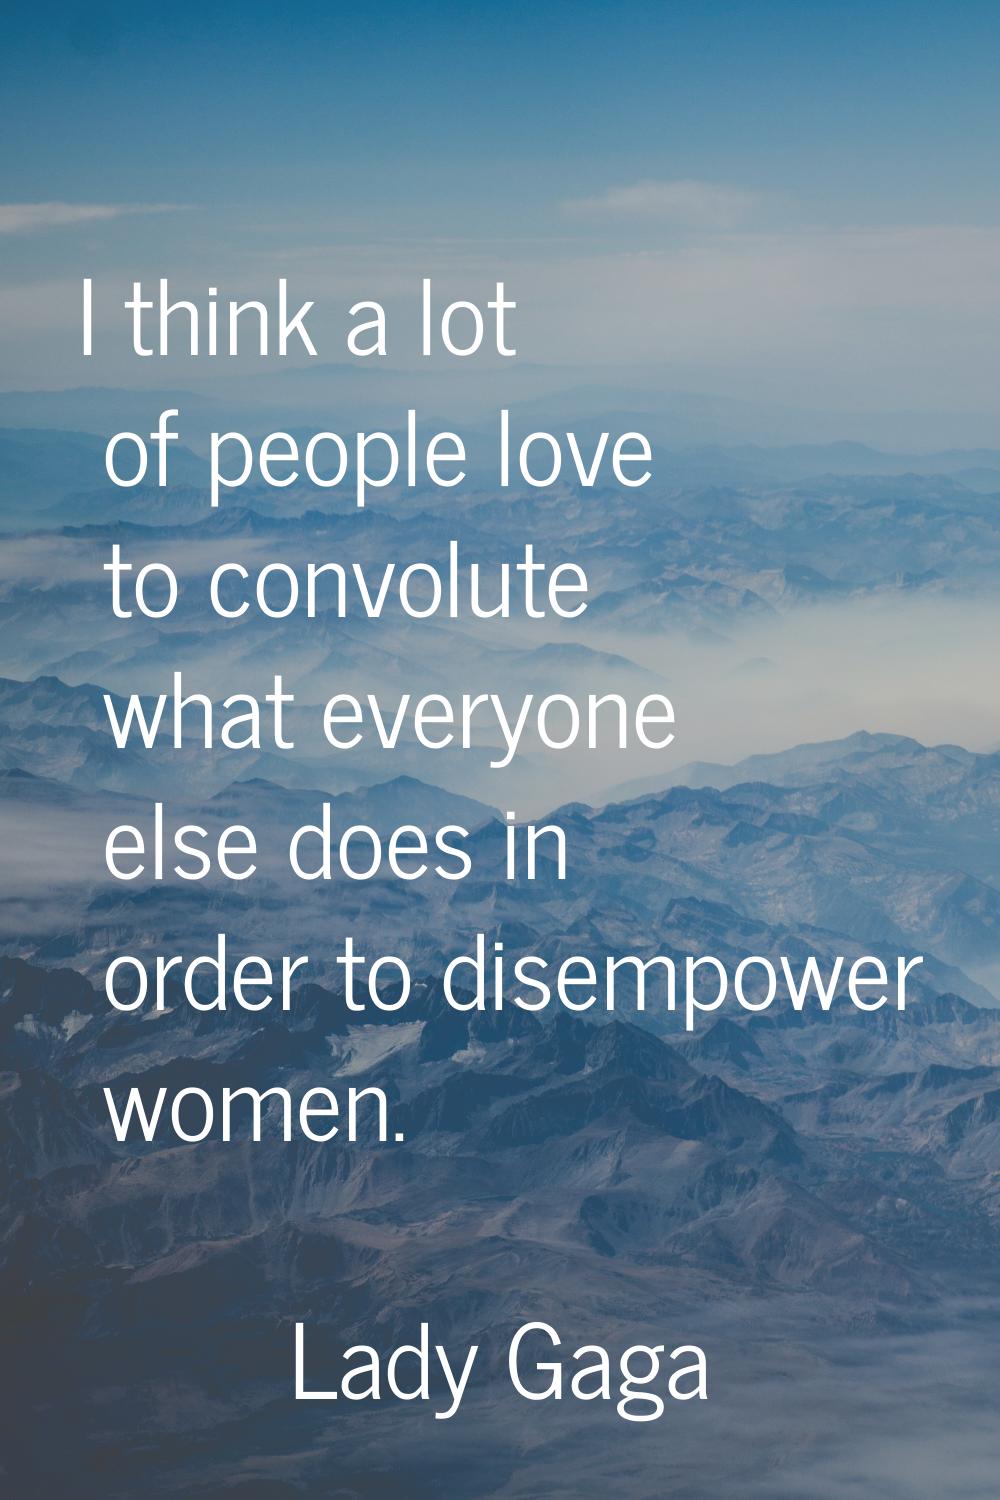 I think a lot of people love to convolute what everyone else does in order to disempower women.